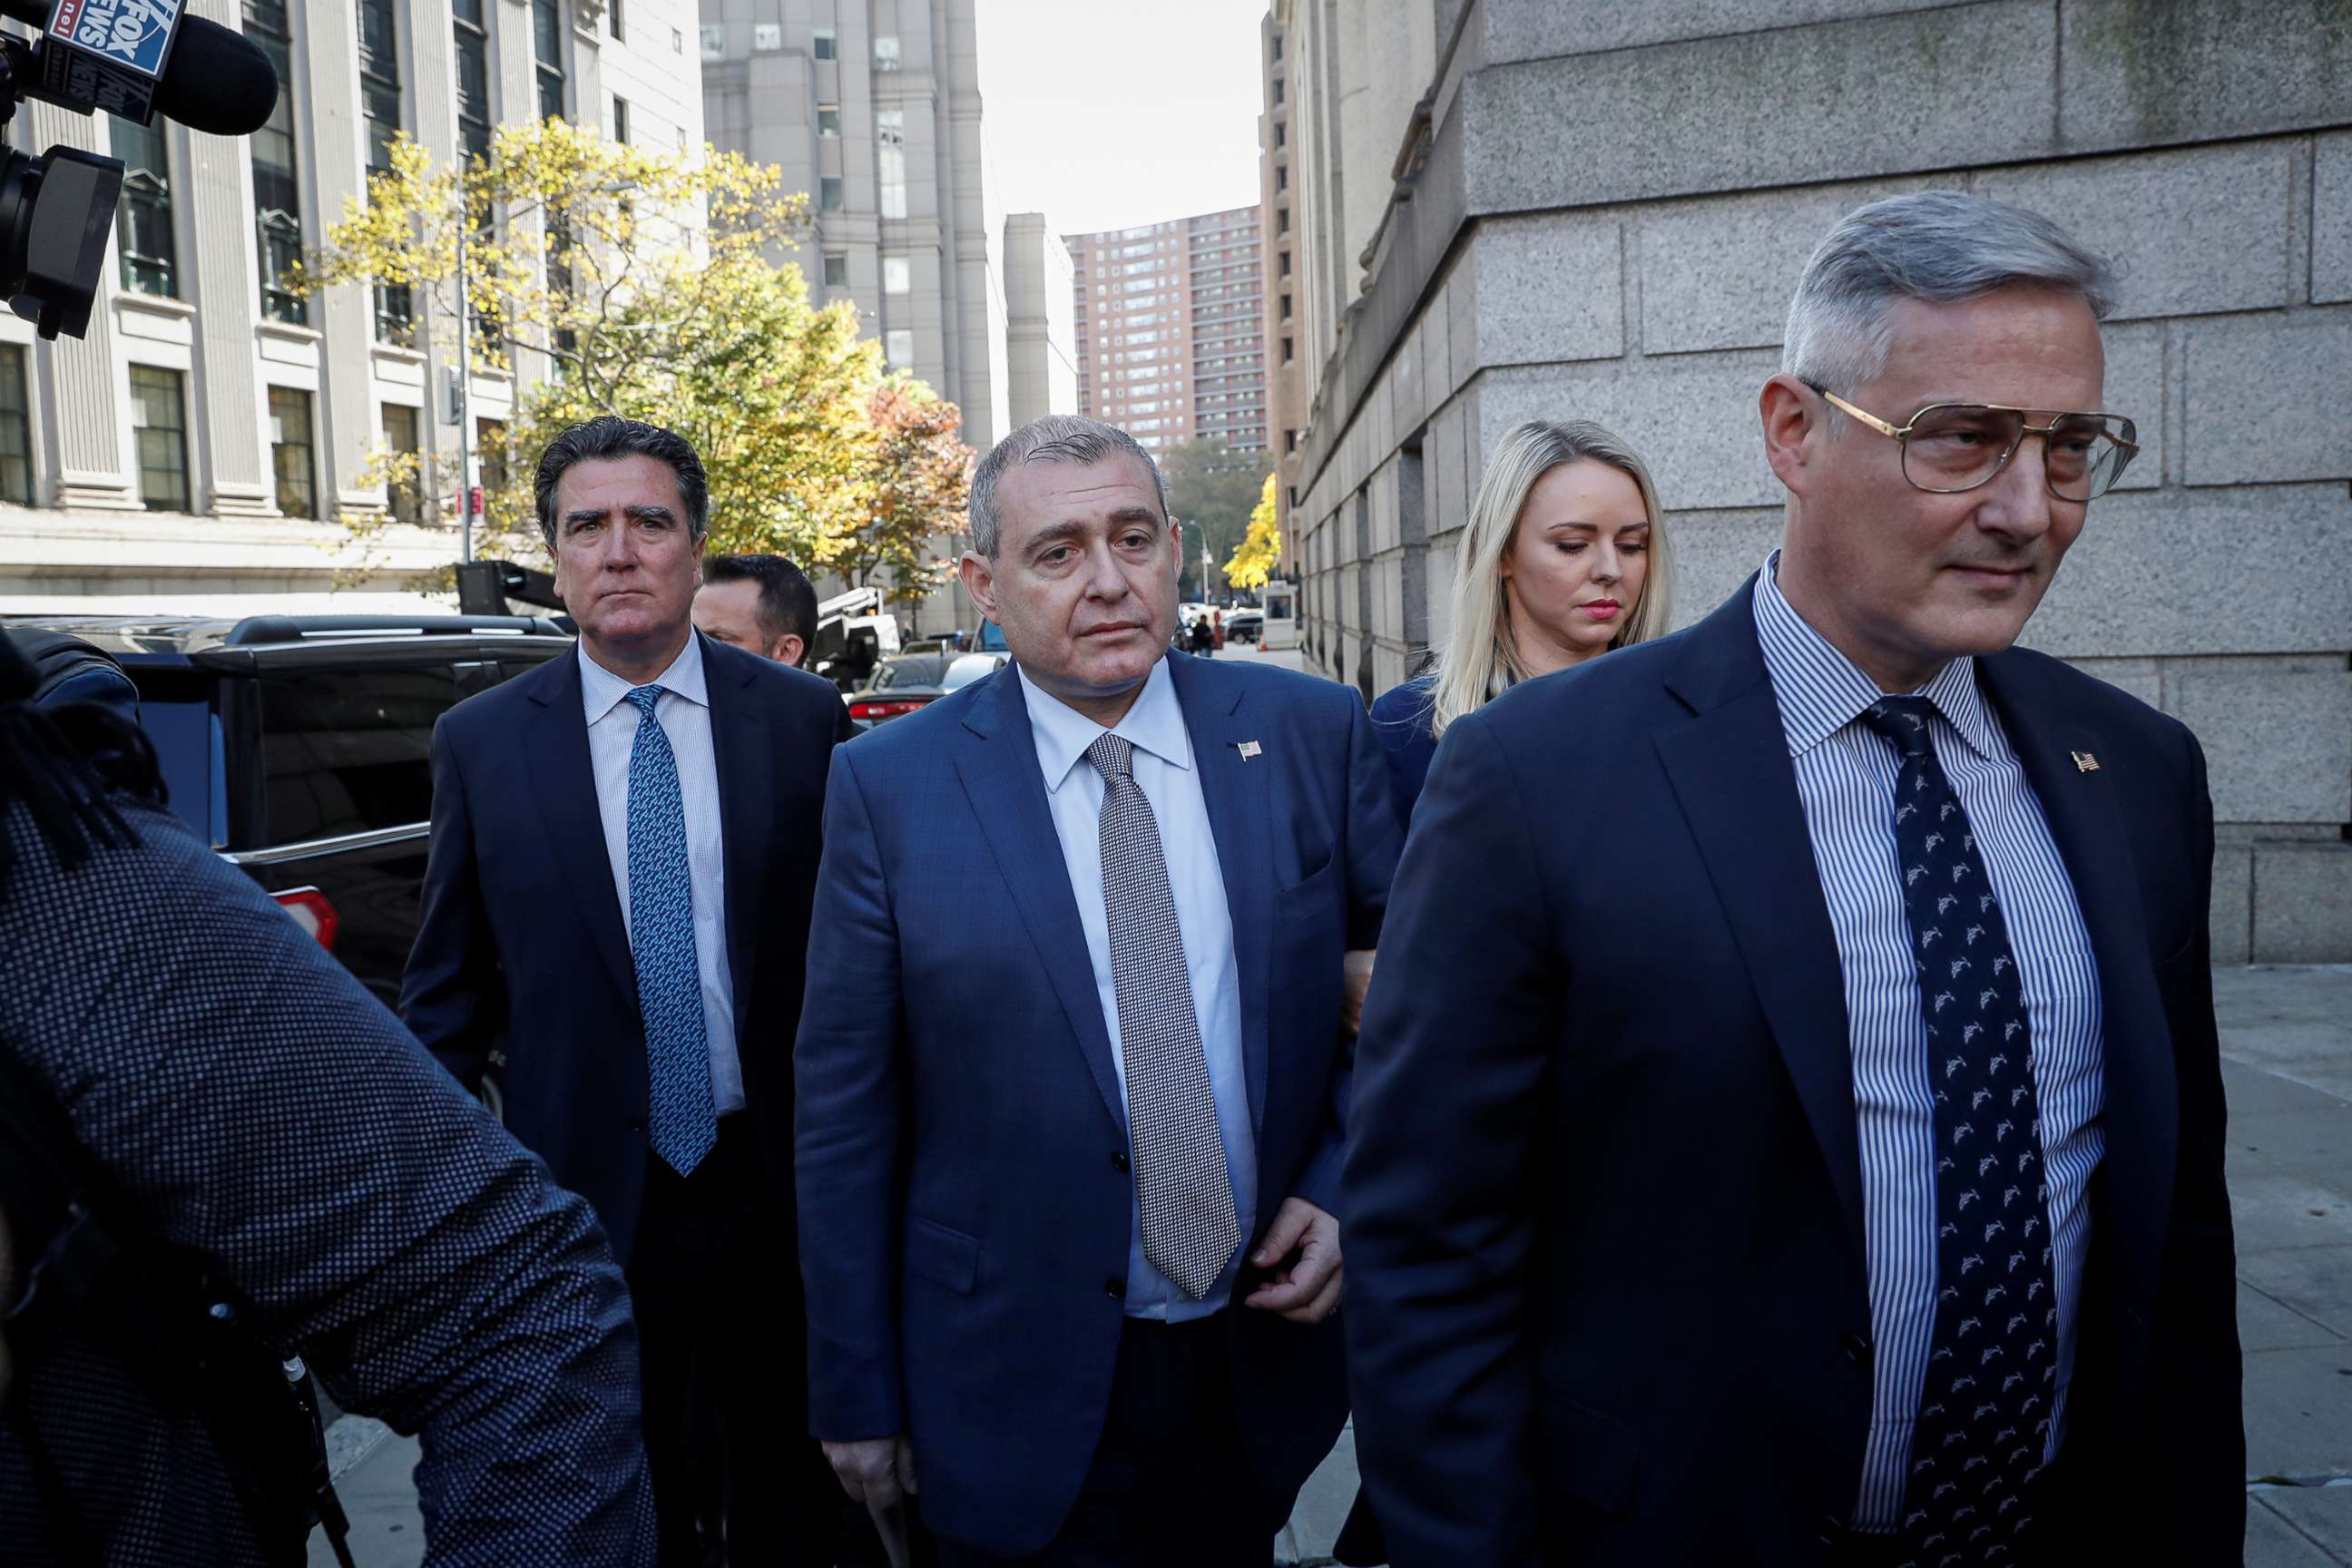 PHOTO: Ukrainian-American businessman Lev Parnas arrives for his arraignment at the United States Courthouse in the Manhattan borough of New York, Oct. 23, 2019.